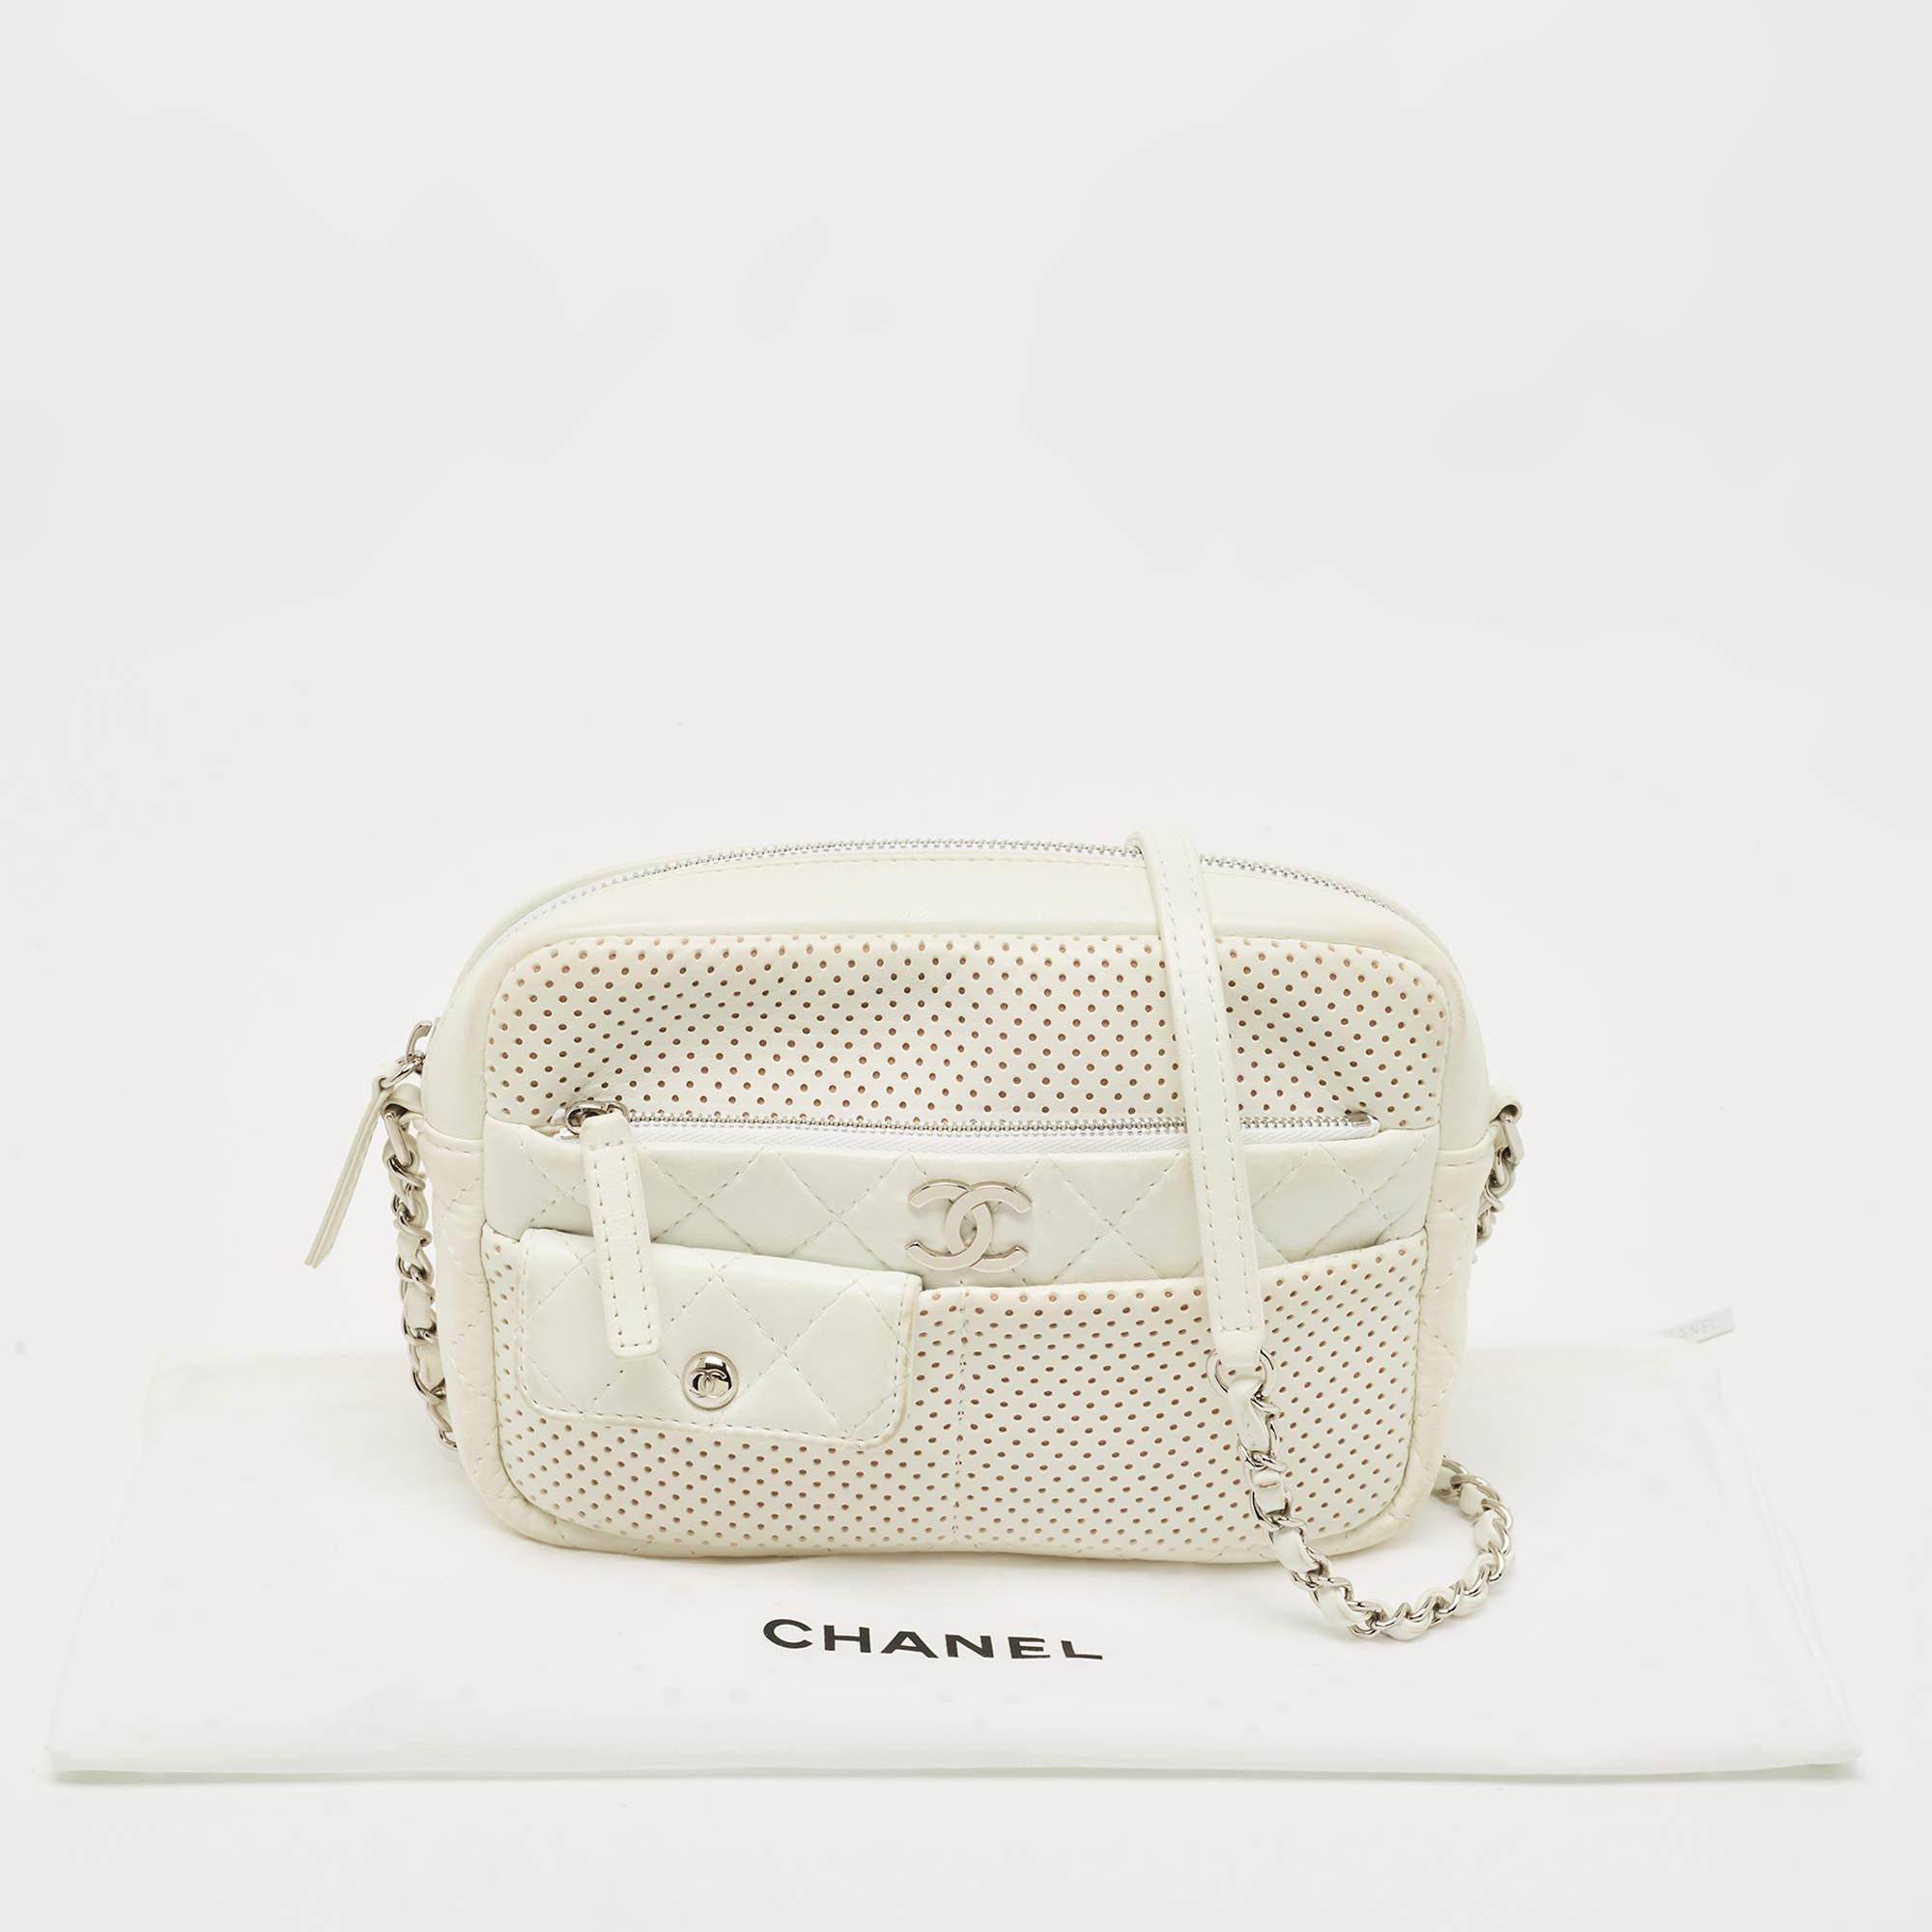 Chanel White Perforated Leather Ultra Pocket Camera Bag 12